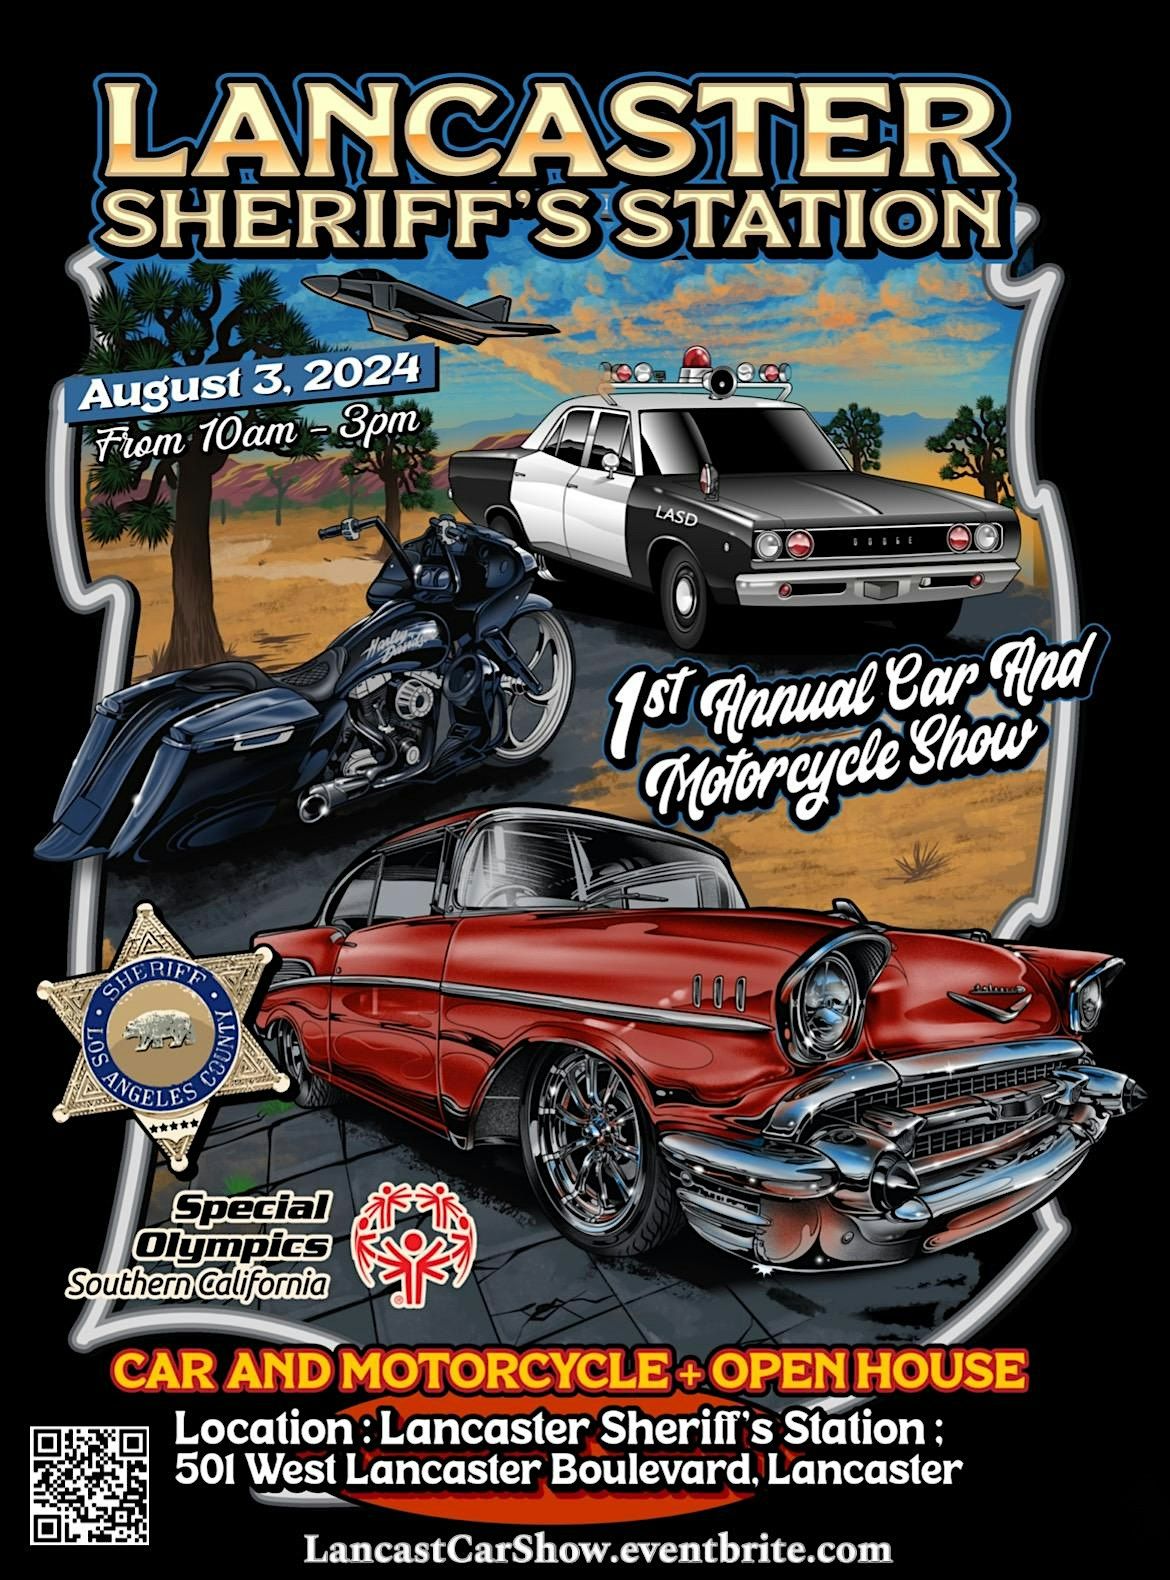 Lancaster Sheriff's Station Car and Motorcycle Show +Open House